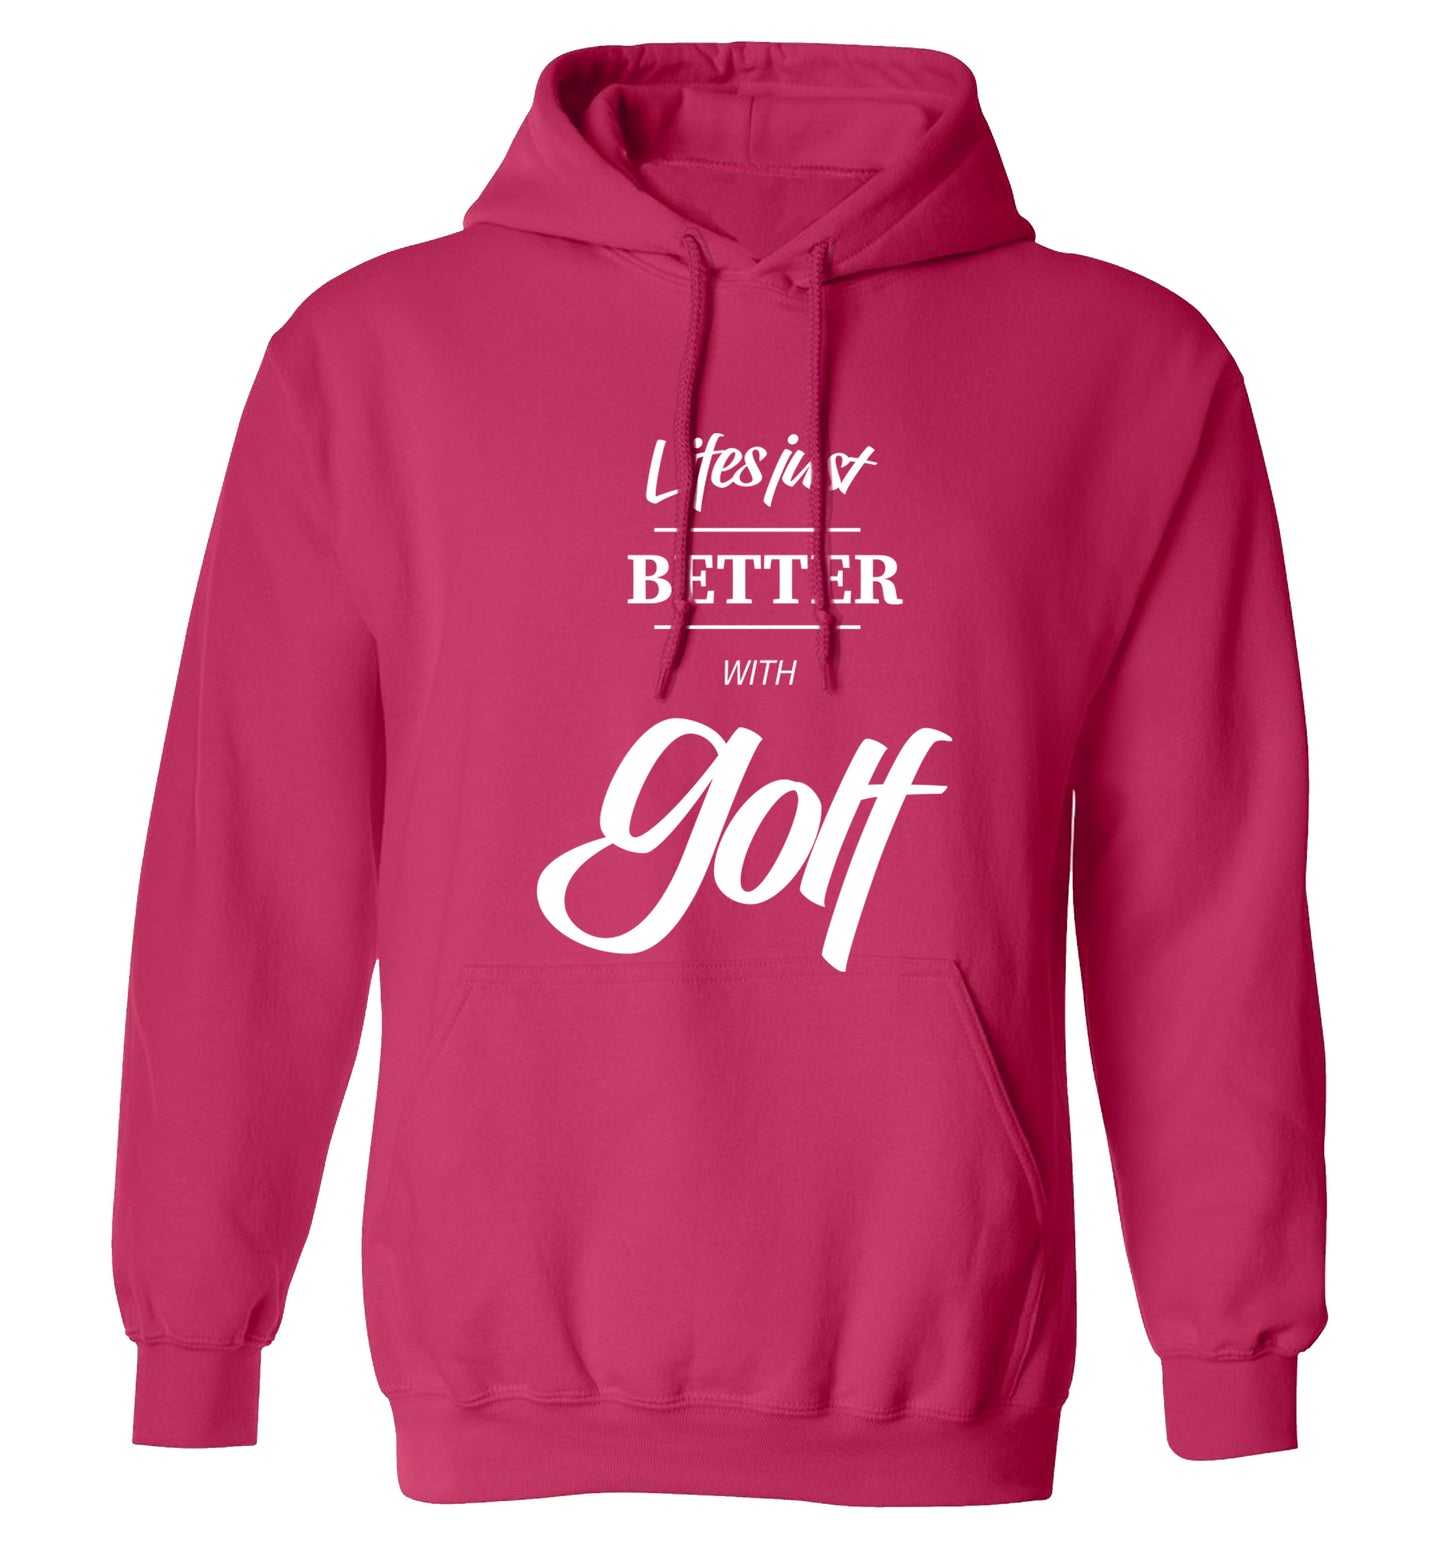 Life is better with golf adults unisex pink hoodie 2XL